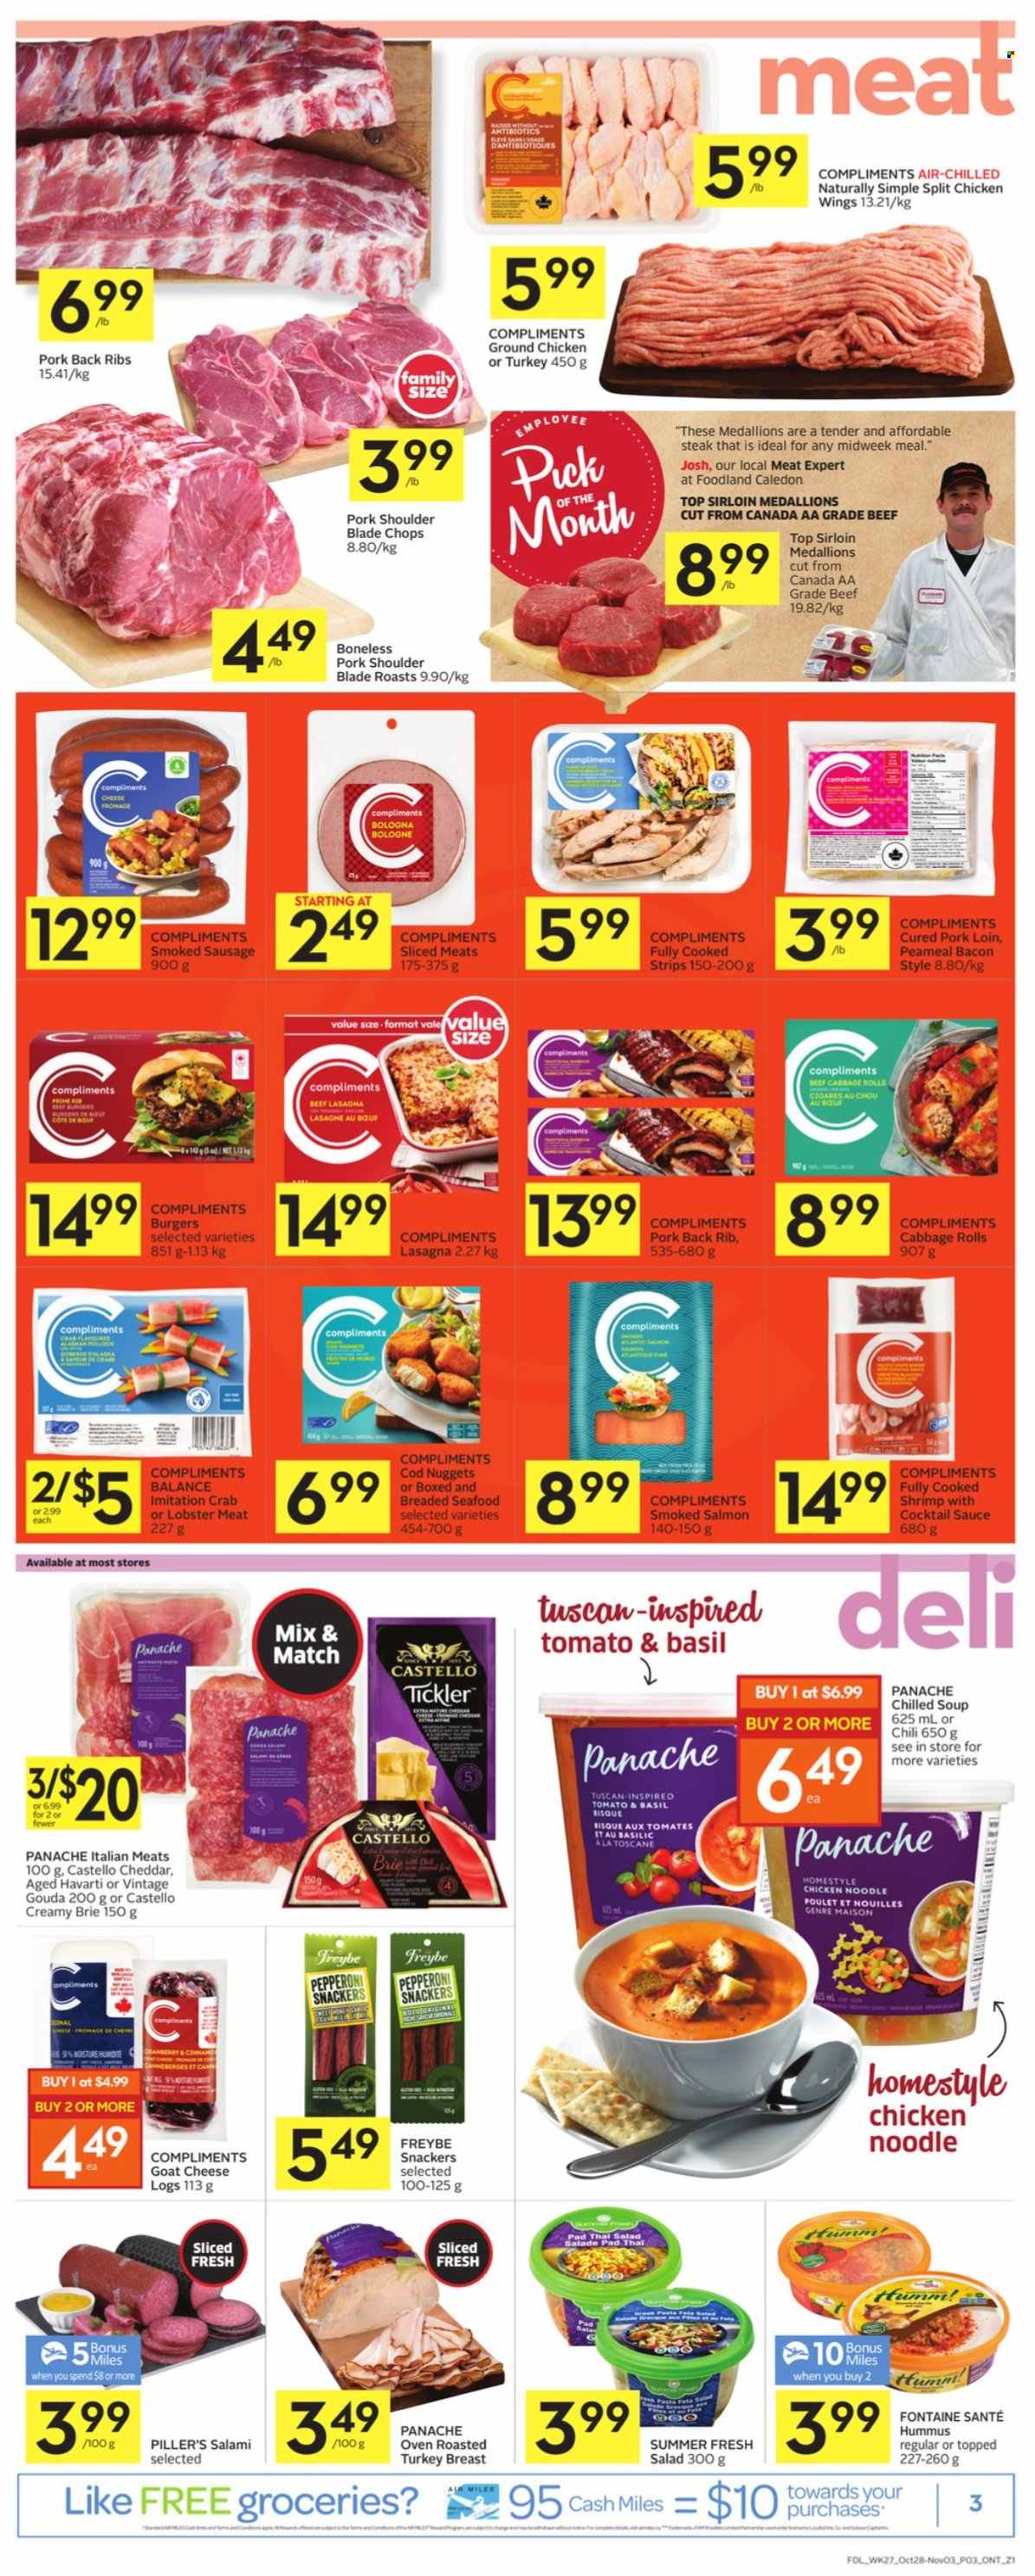 thumbnail - Foodland Flyer - October 28, 2021 - November 03, 2021 - Sales products - cabbage, salad, cod, lobster, salmon, smoked salmon, seafood, crab, shrimps, soup, nuggets, hamburger, sauce, noodles, lasagna meal, bacon, salami, sausage, smoked sausage, pepperoni, hummus, goat cheese, gouda, Havarti, cheddar, cheese, brie, chicken wings, strips, cocktail sauce, ground chicken, chicken, turkey, pork loin, pork meat, pork ribs, pork shoulder, pork back ribs, steak. Page 3.